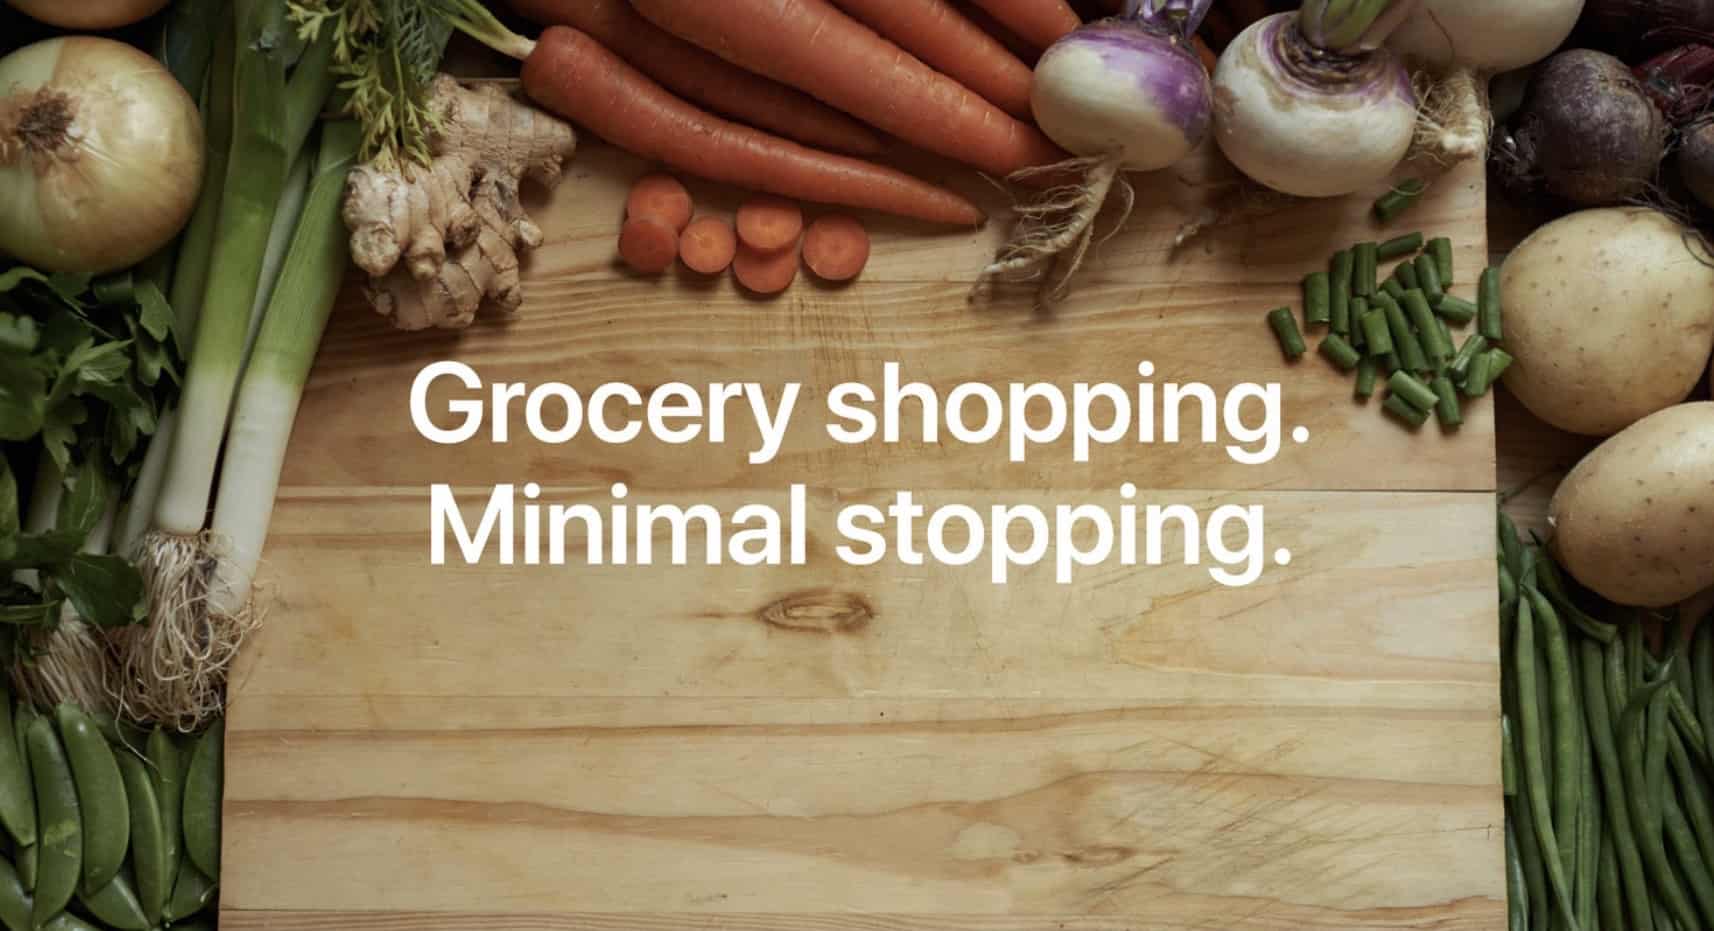 Apple Pay Instacart free delivery promotion